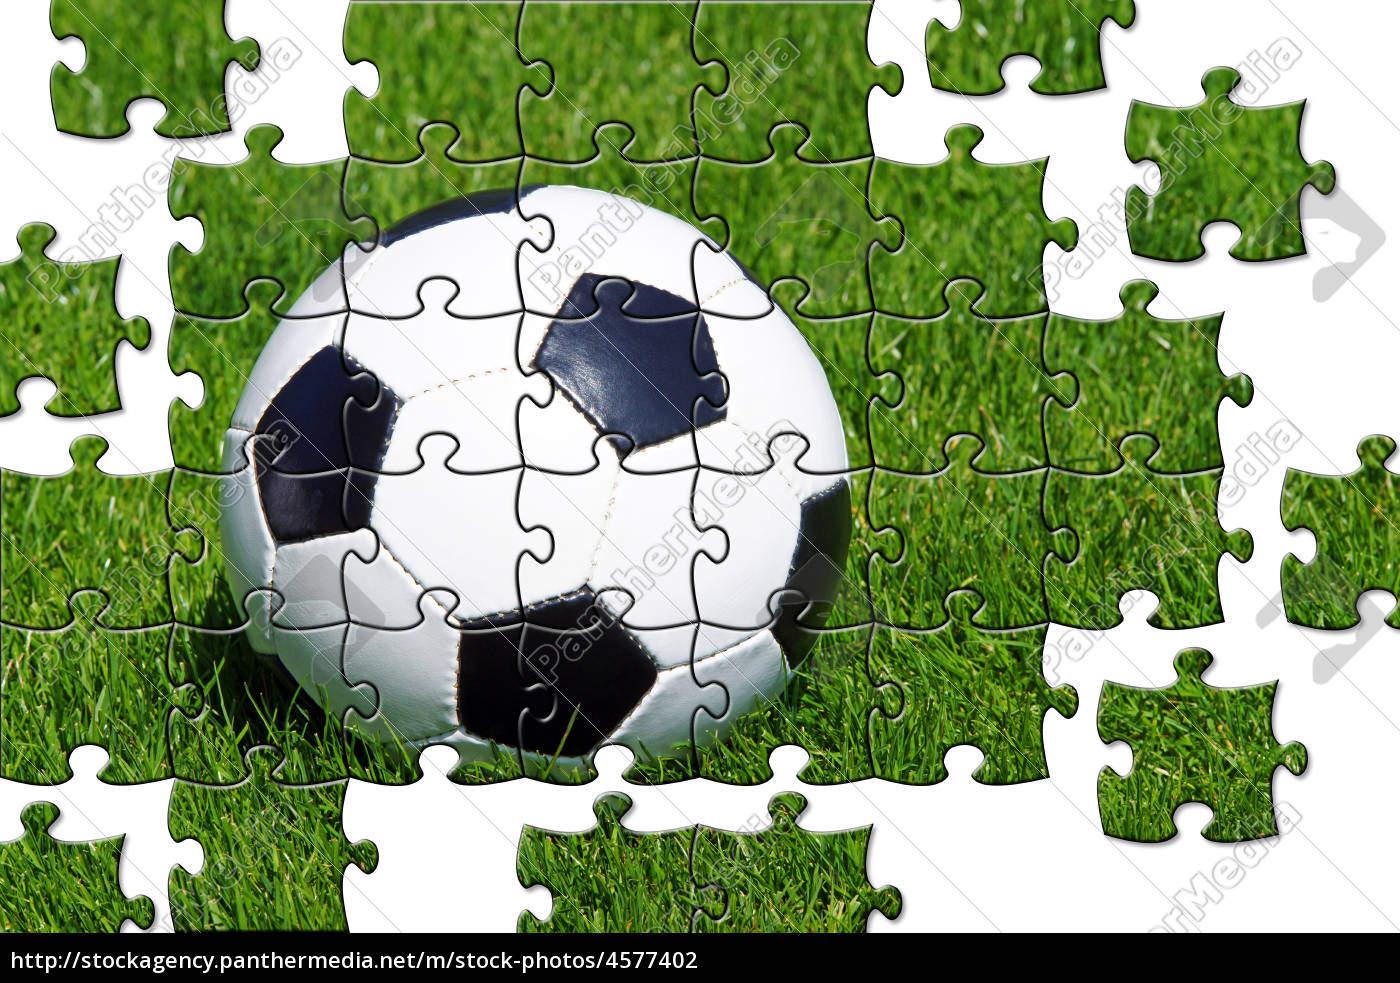 football puzzle - Stock image #4577402